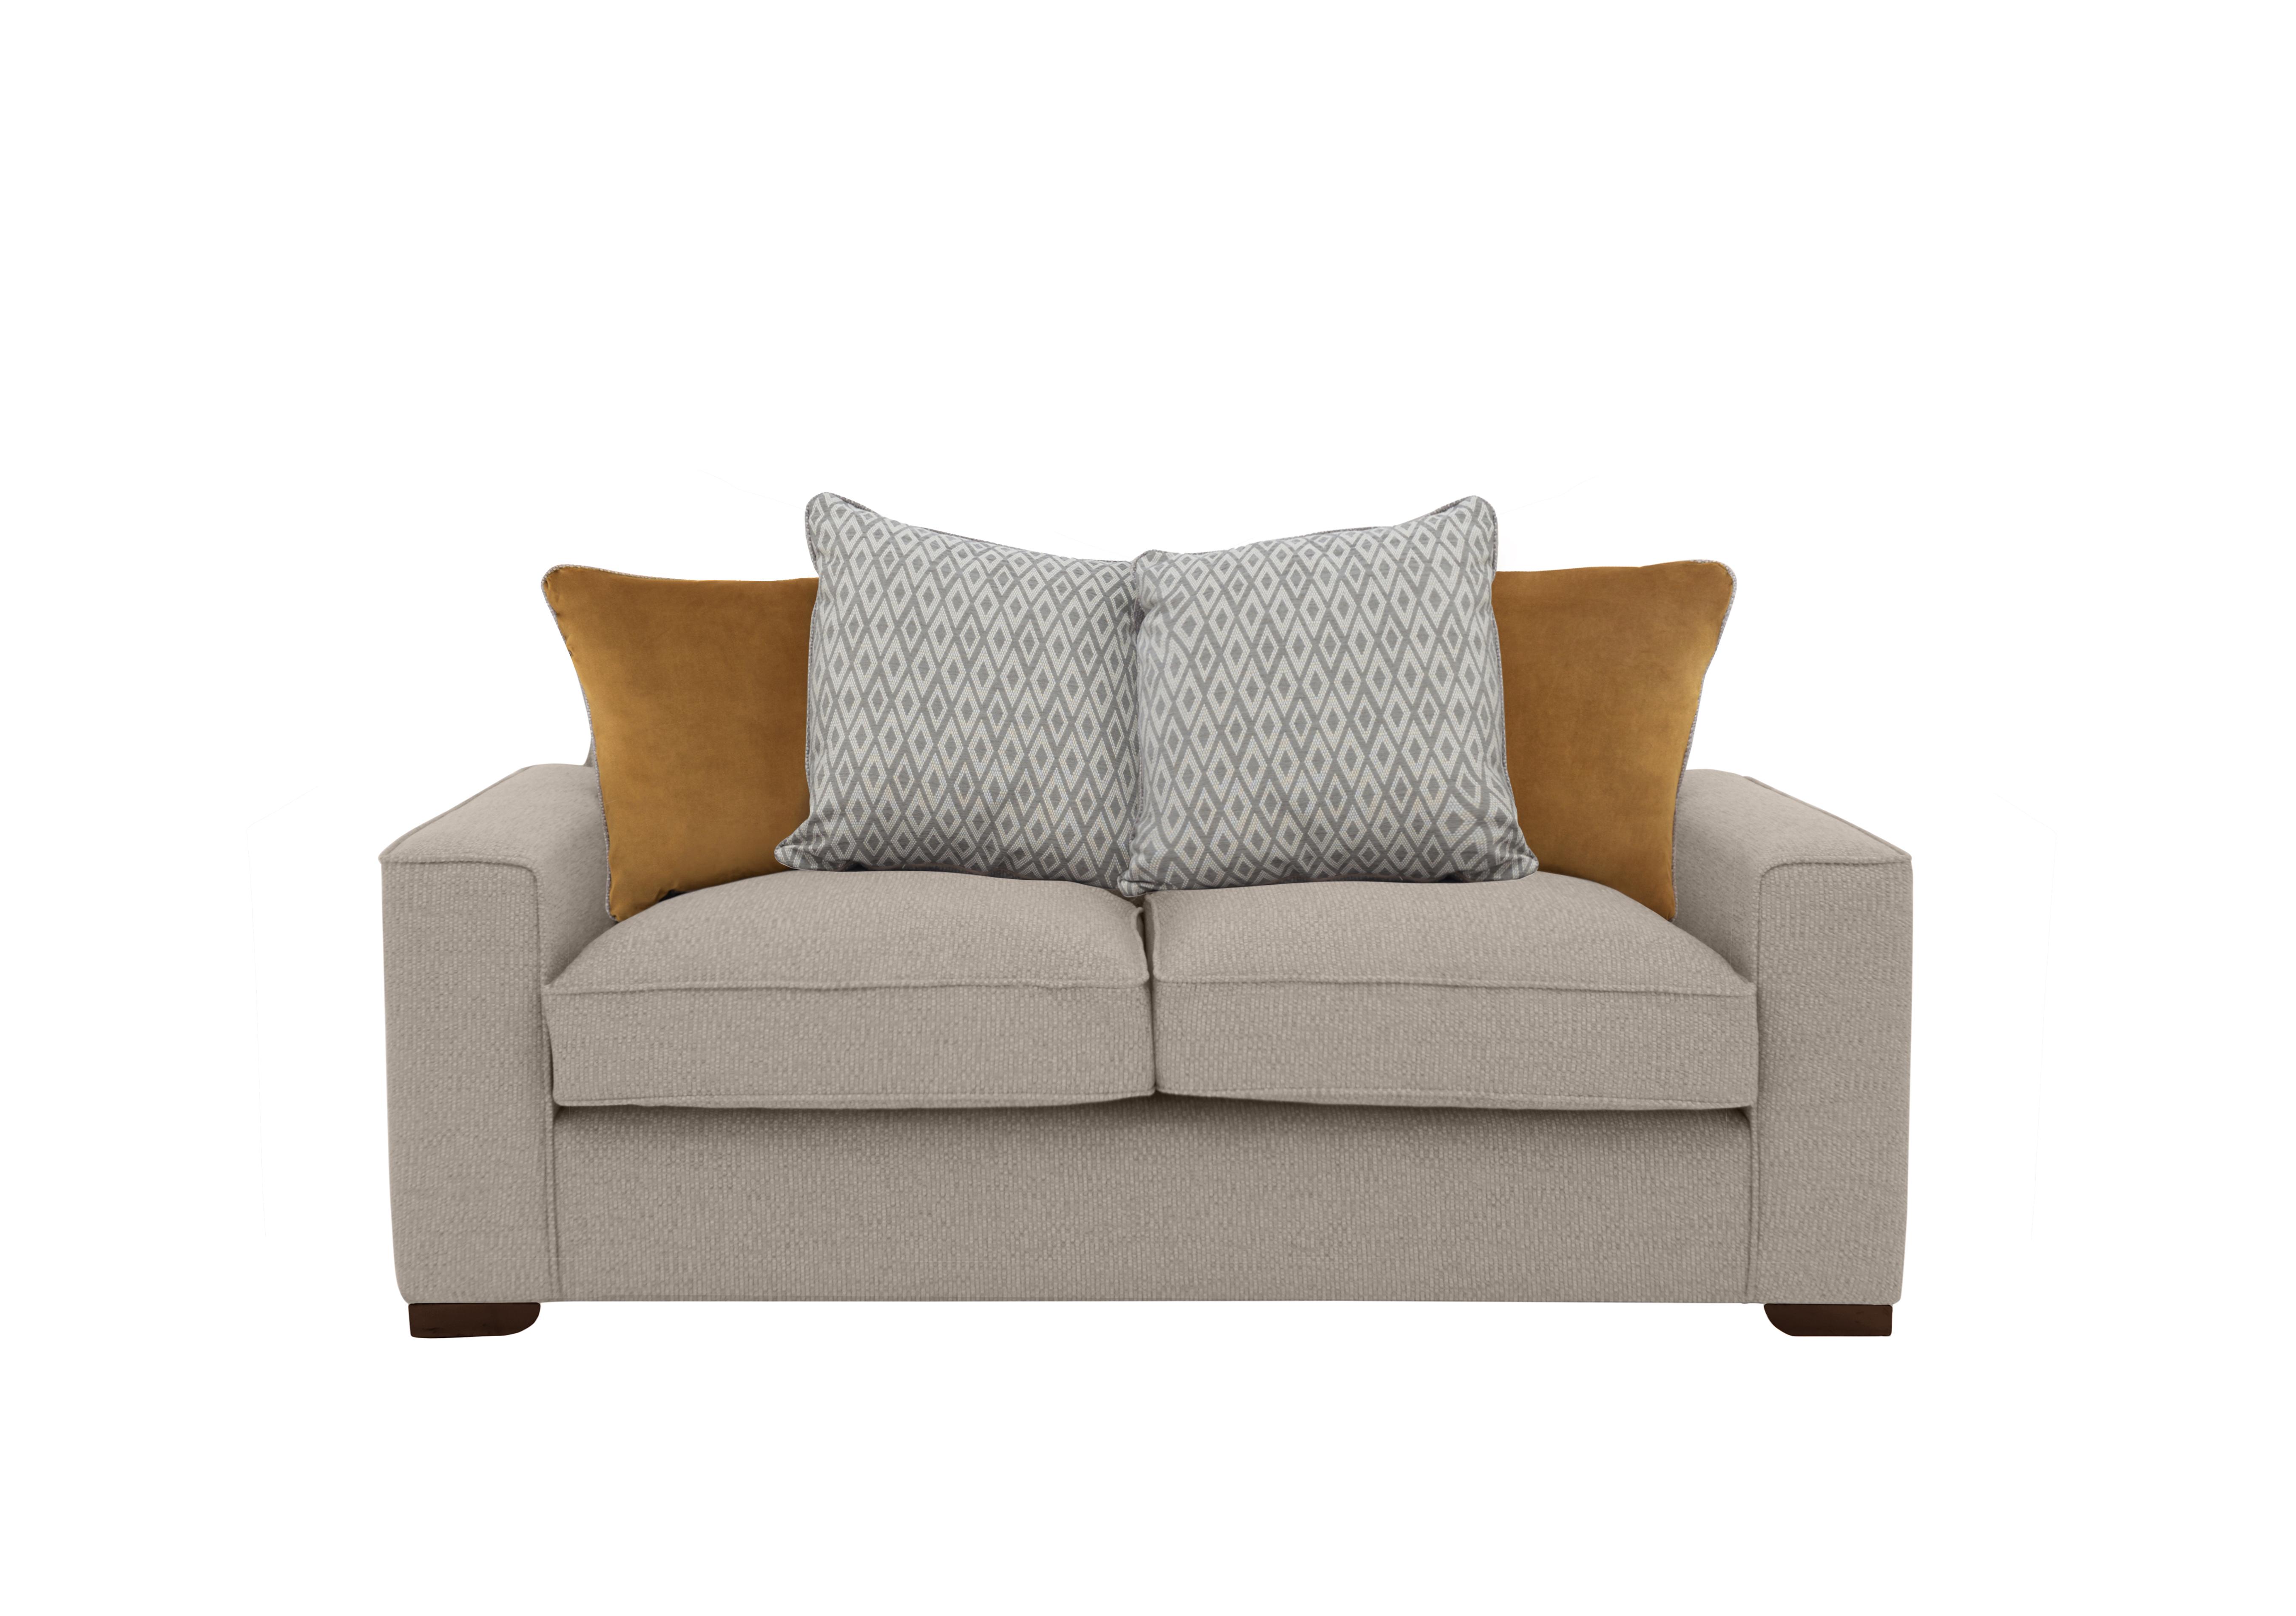 Cory 2 Seater Fabric Scatter Back Sofa in Dallas Natural Mustard Pack on Furniture Village